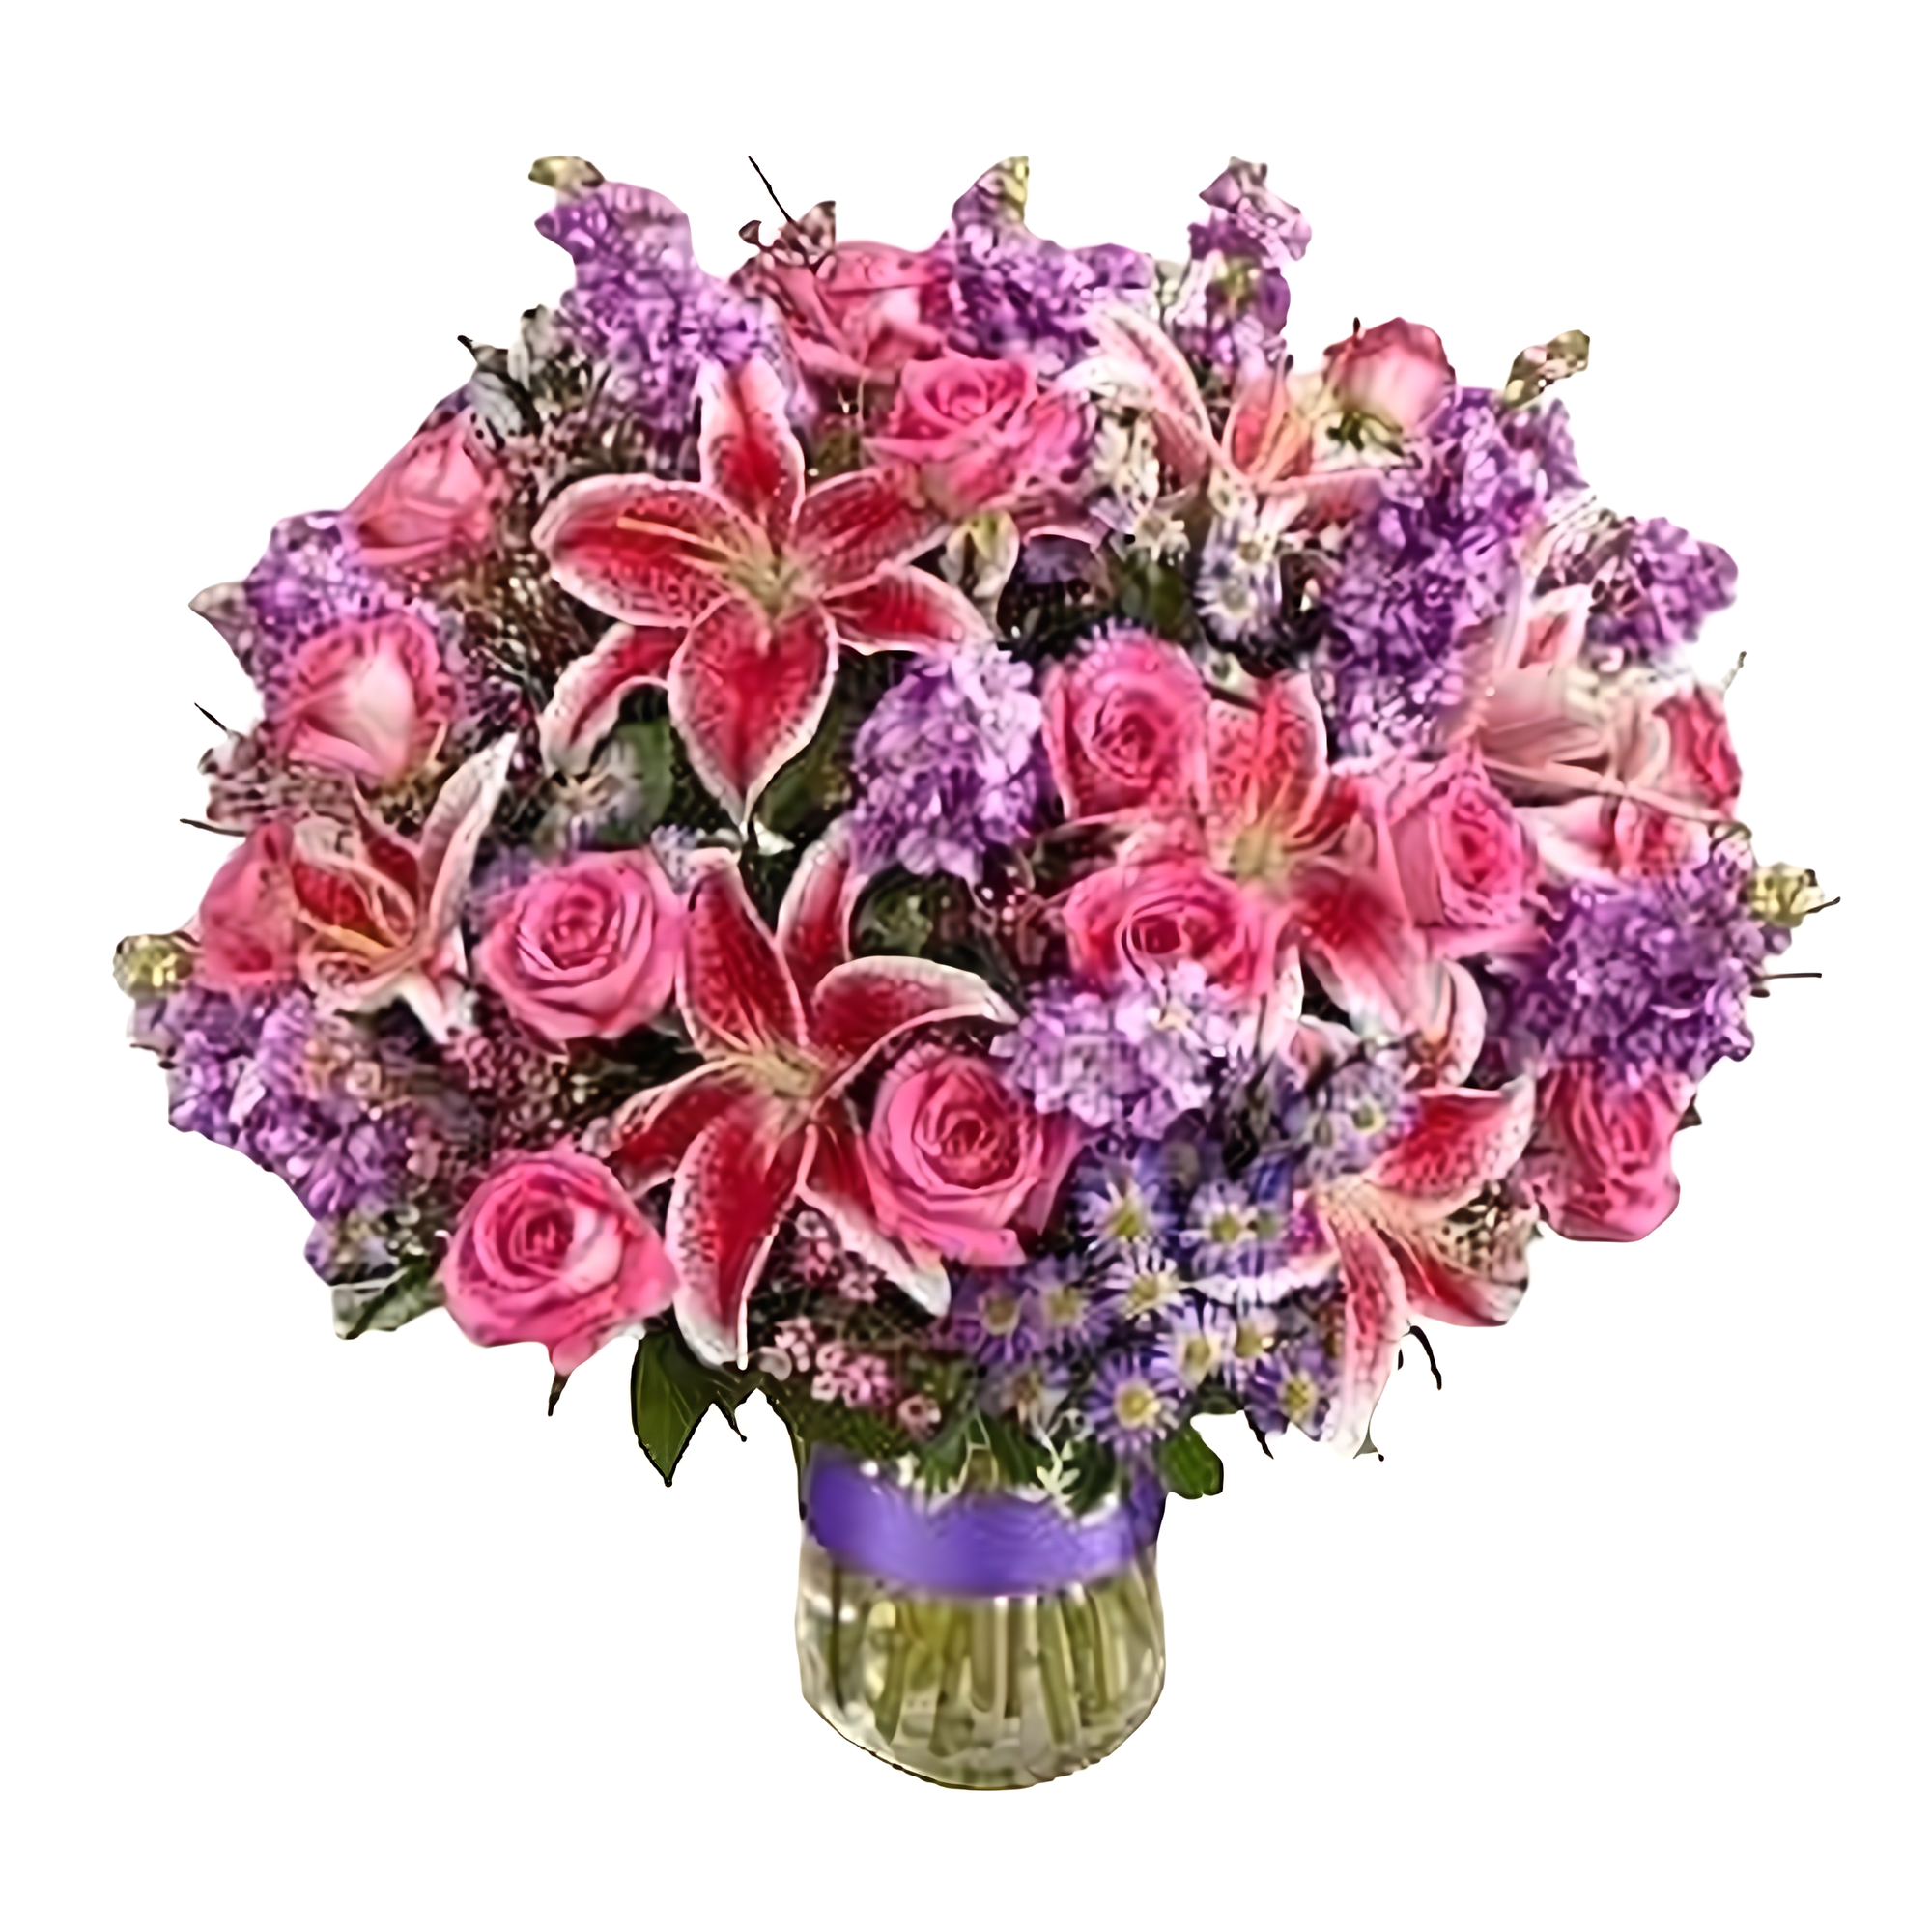 Manhattan Flower Delivery - Forever Loving You - Occasions > Anniversary